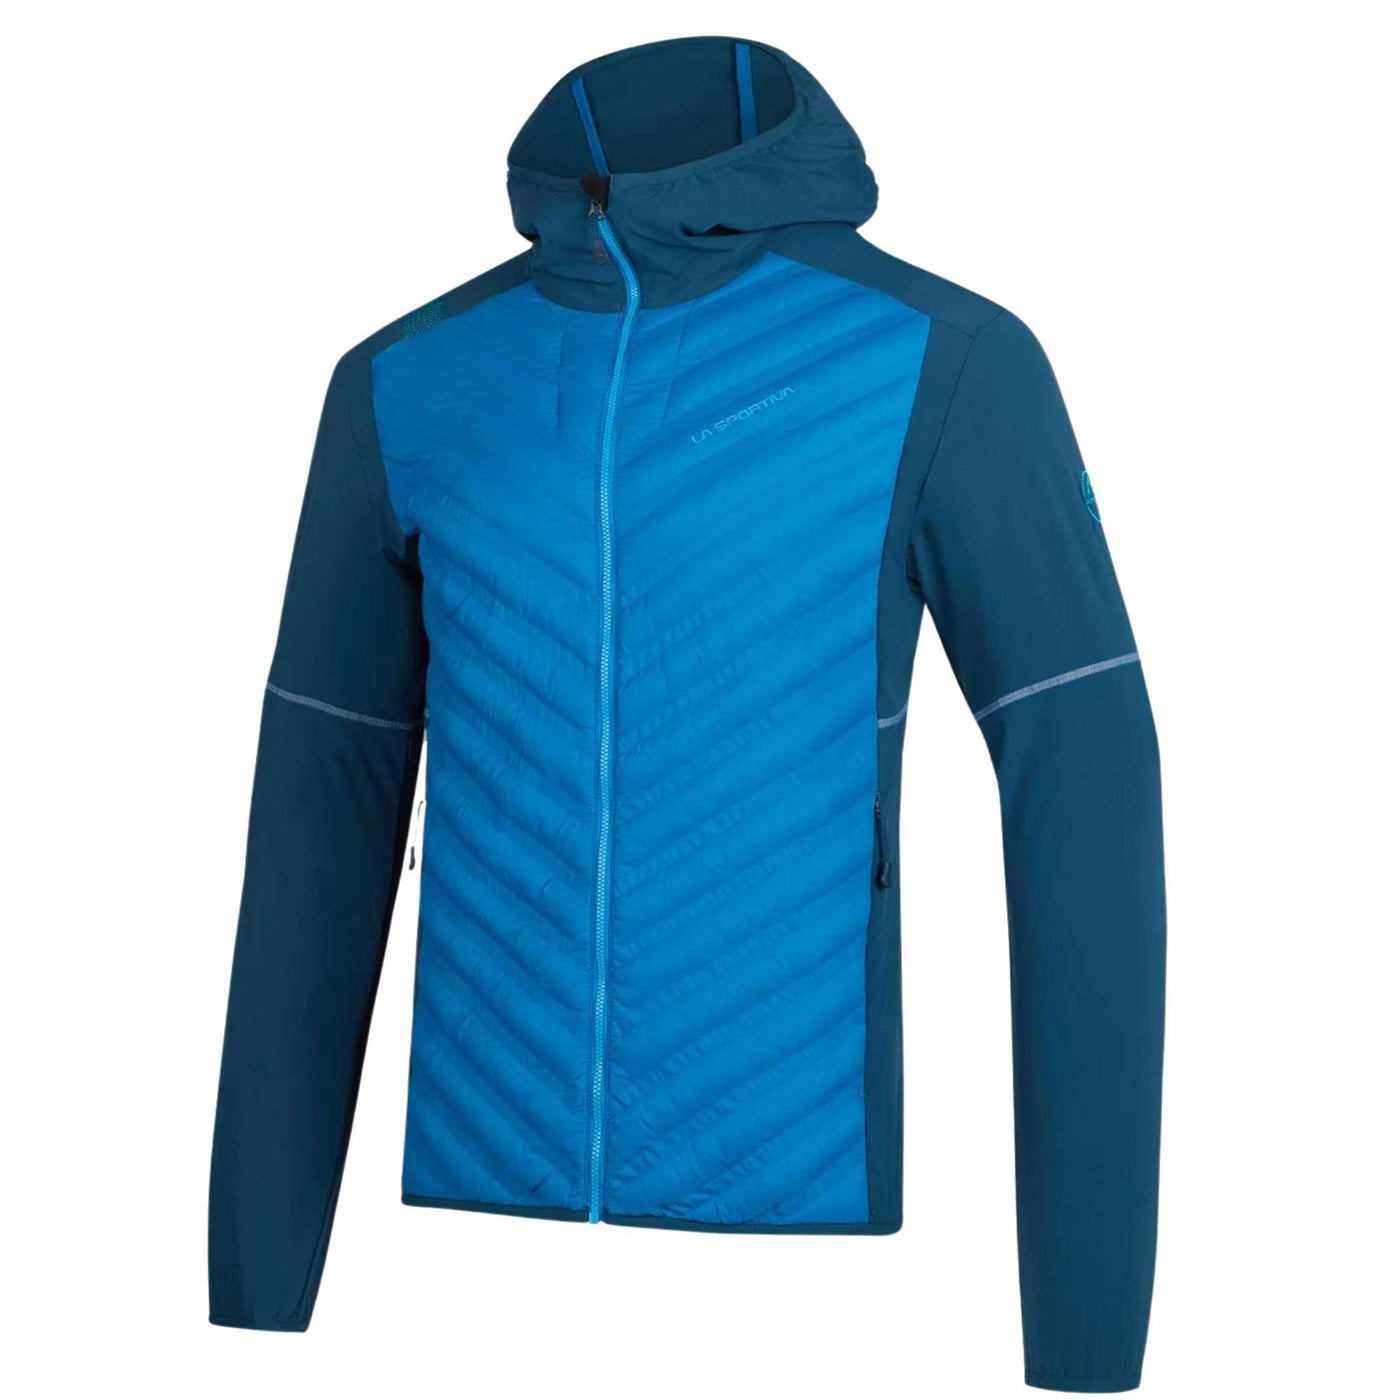 La Sportiva Jacket Koro - Mens | Windproof Insulated Jacket | Further Faster Christchurch NZ | #electric-blue-storm-blue